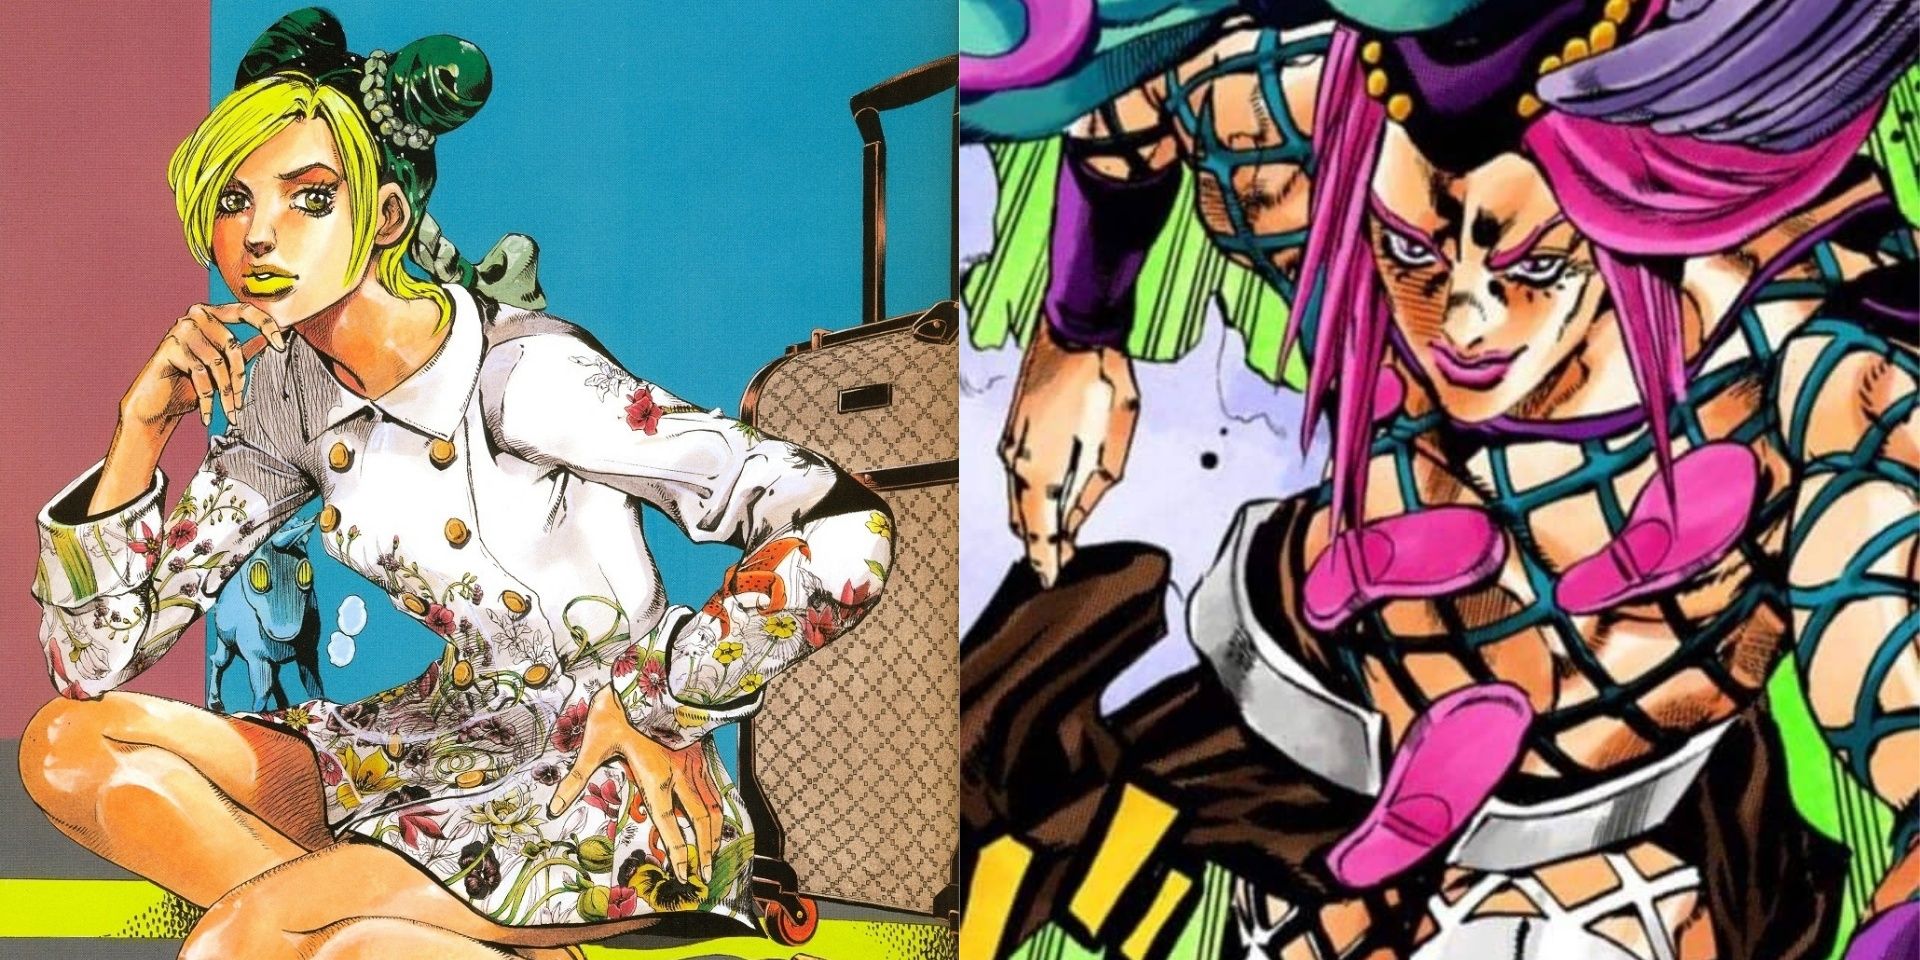 Jolyne Cujoh and Narciso Anasui might seem like a good match at first glanc...